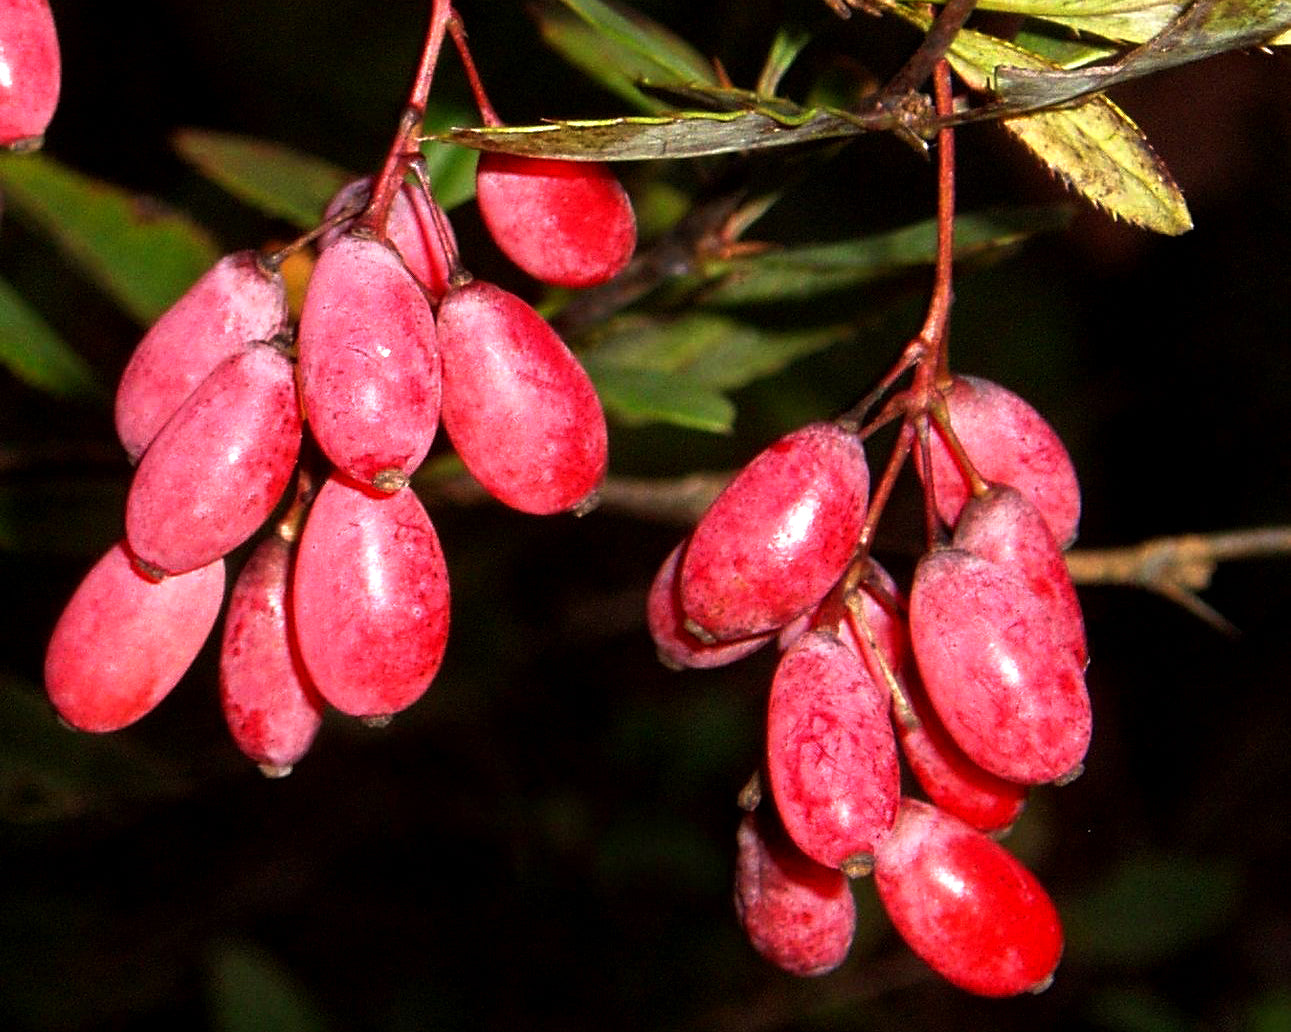 a common berberry, among one of the plants that help produce berberine HCL